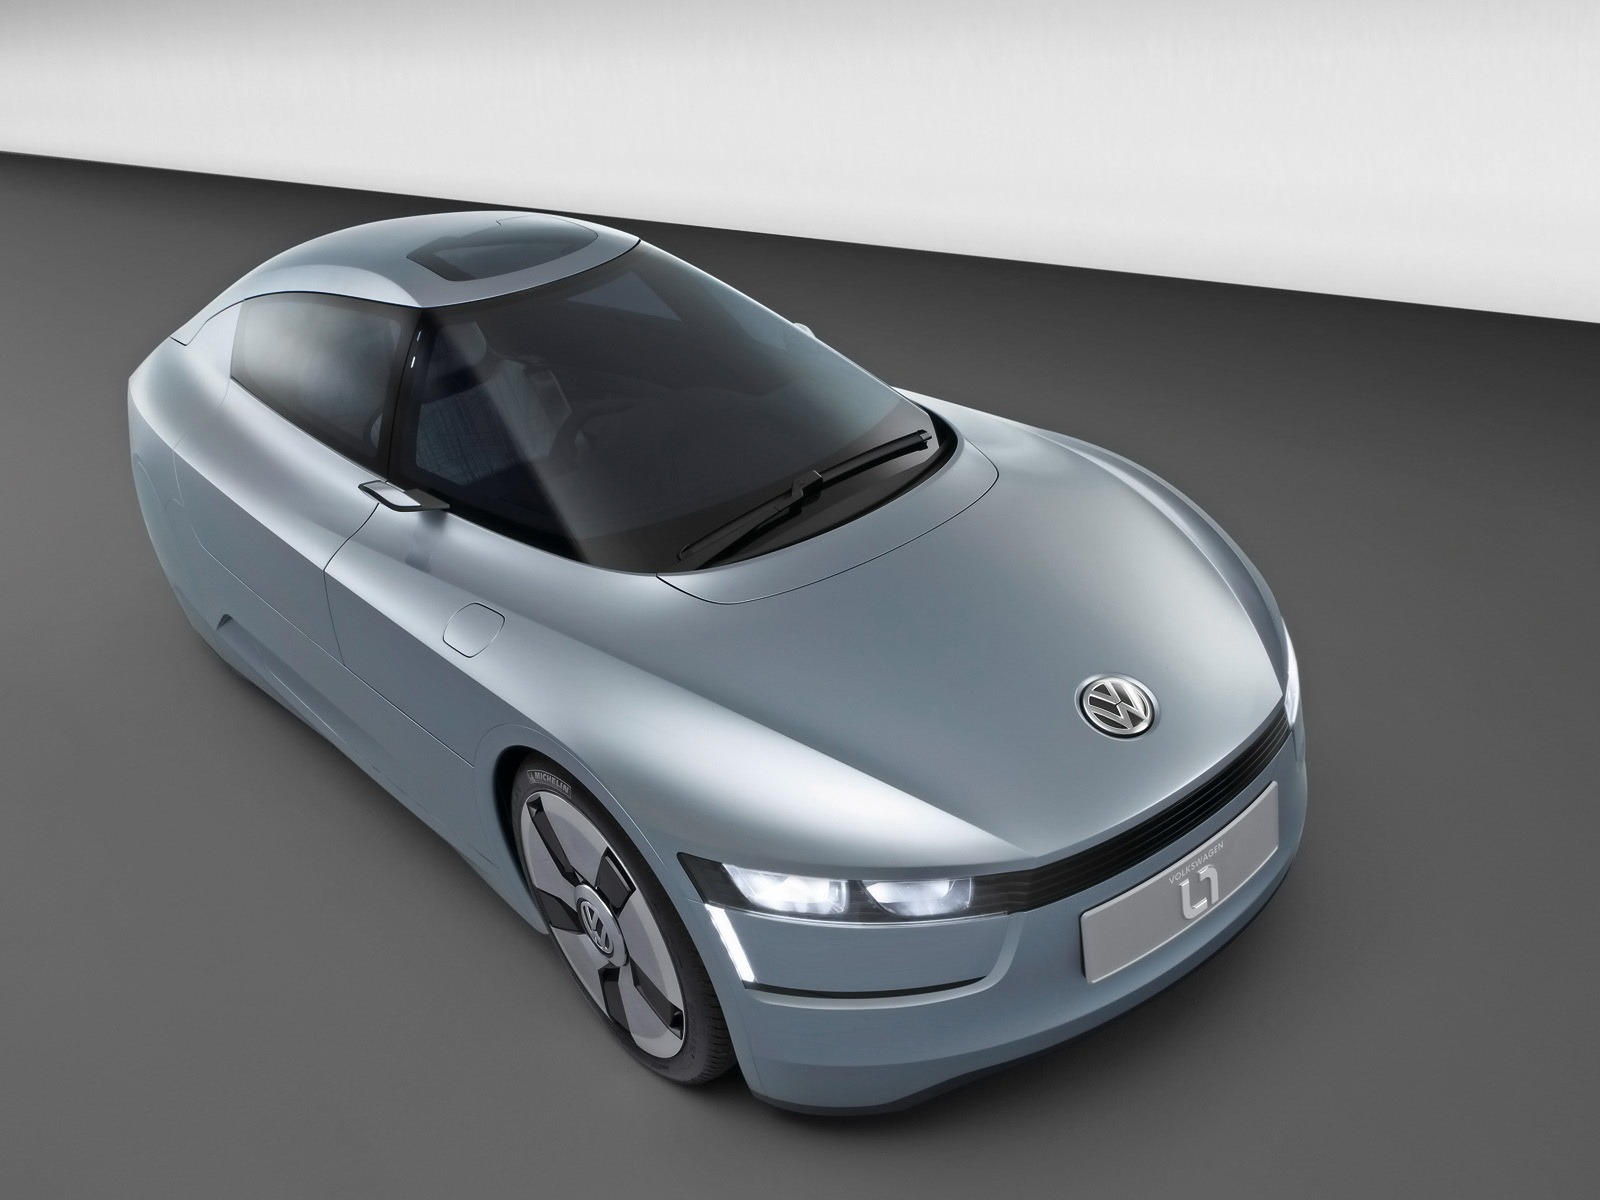 Volkswagen L1 Tapety Concept Car #21 - 1600x1200